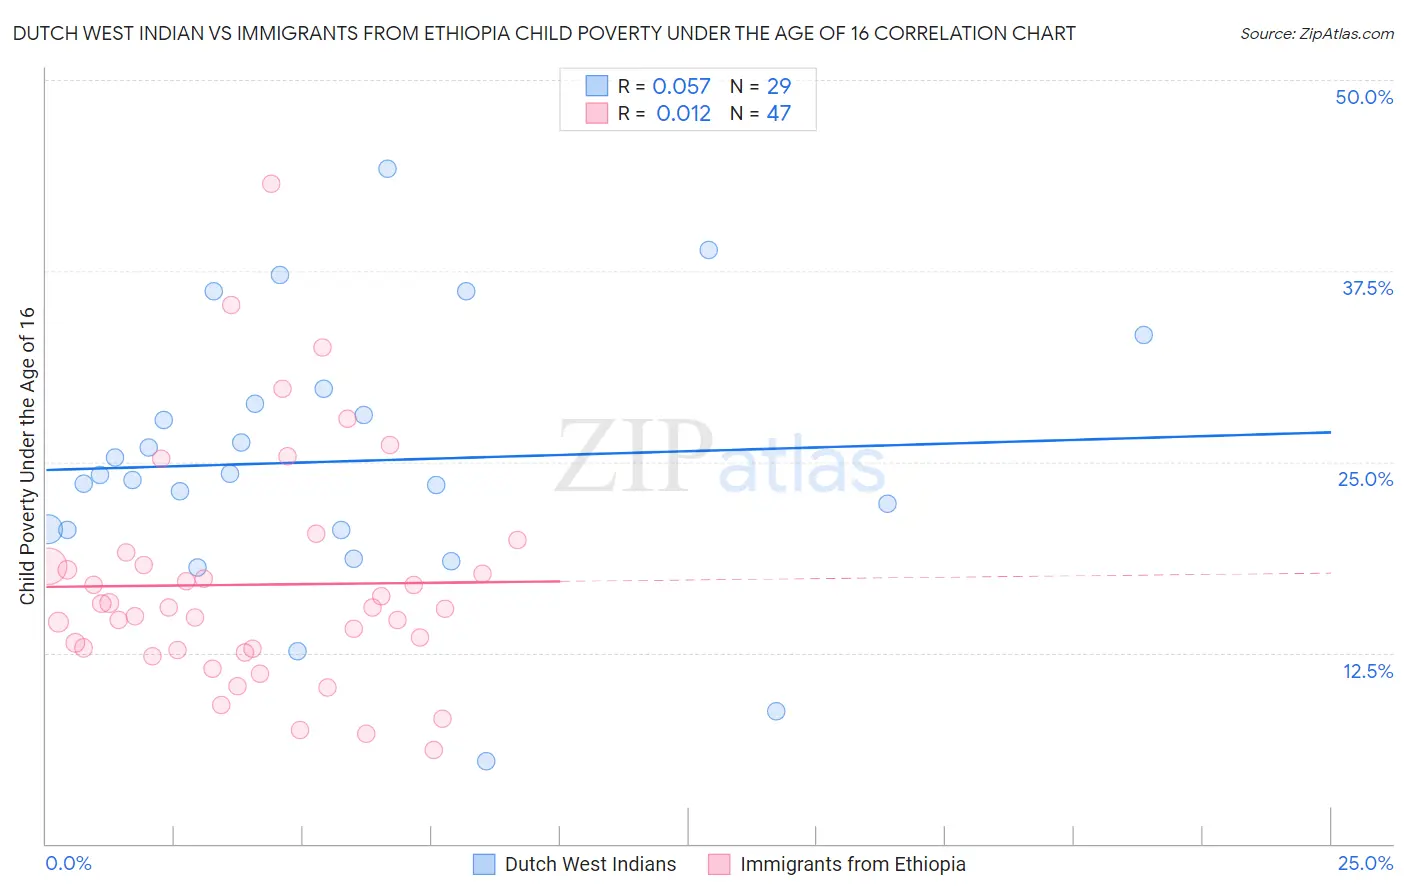 Dutch West Indian vs Immigrants from Ethiopia Child Poverty Under the Age of 16